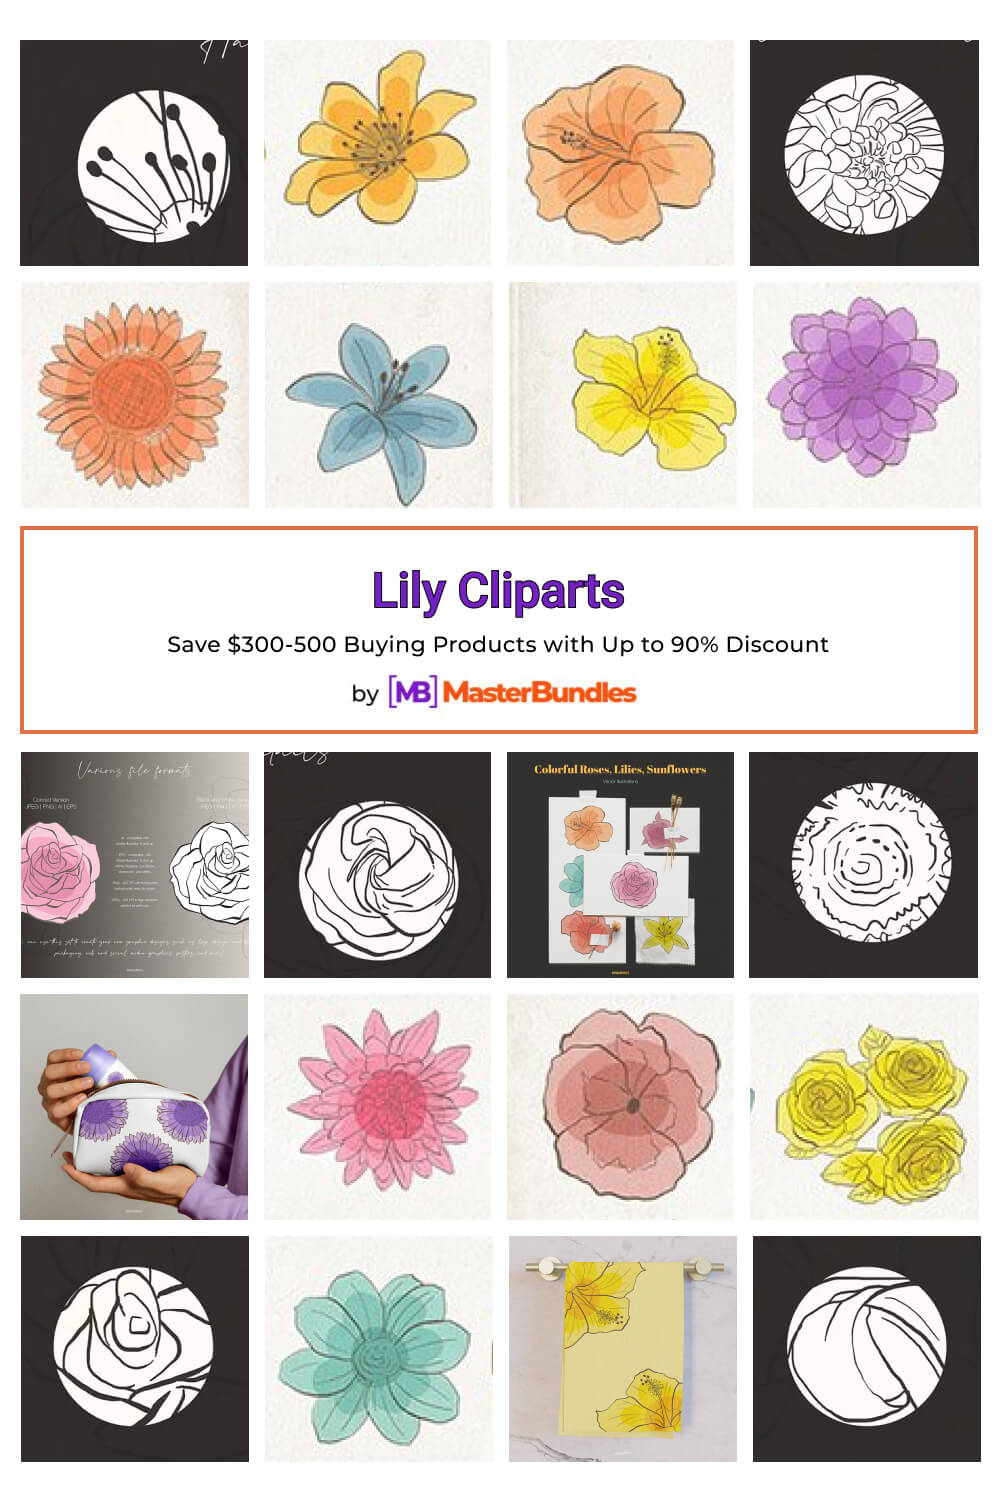 lily cliparts pinterest image.